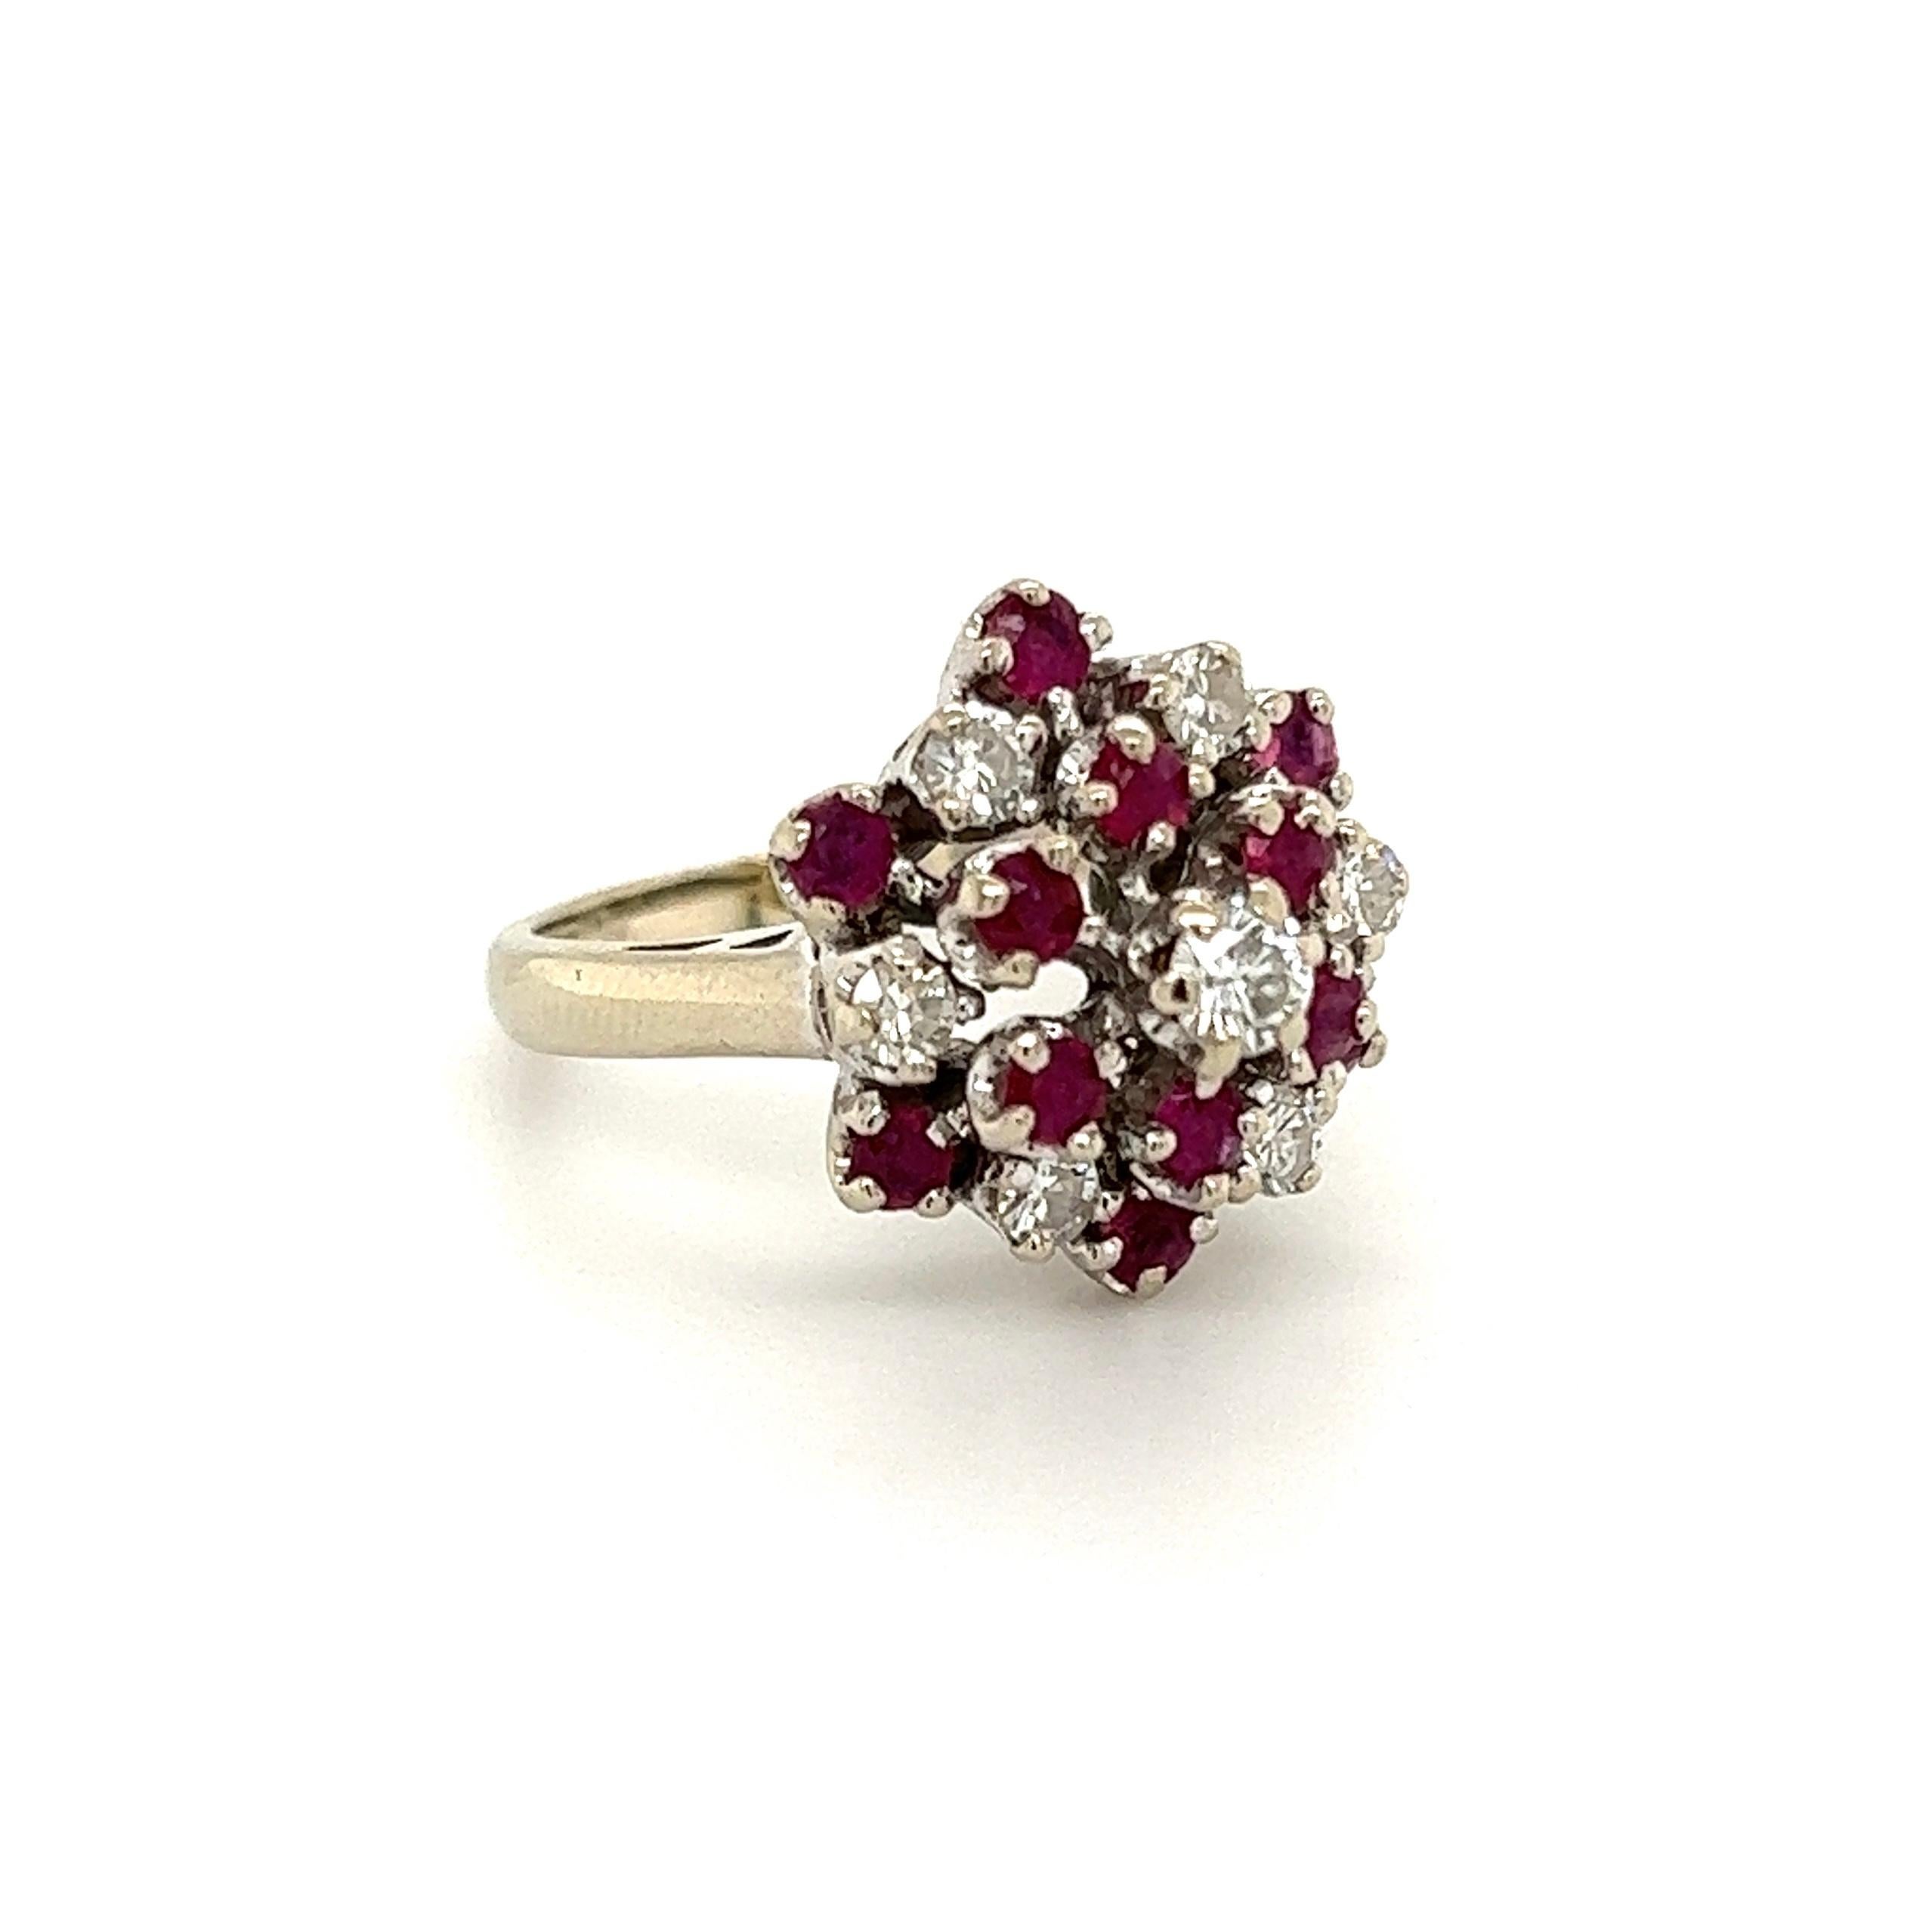 Beautiful Ruby and Diamond Cluster Ring, Hand set with Diamonds weighing approx. 0.48tcw and Rubies, approx. 0.90tcw. The ring is Hand crafted in 14K White Gold. Measuring approx. 1.12”L x 0.73”W x 0.65”H. Ring Size 4.75, we offer ring re-sizing.